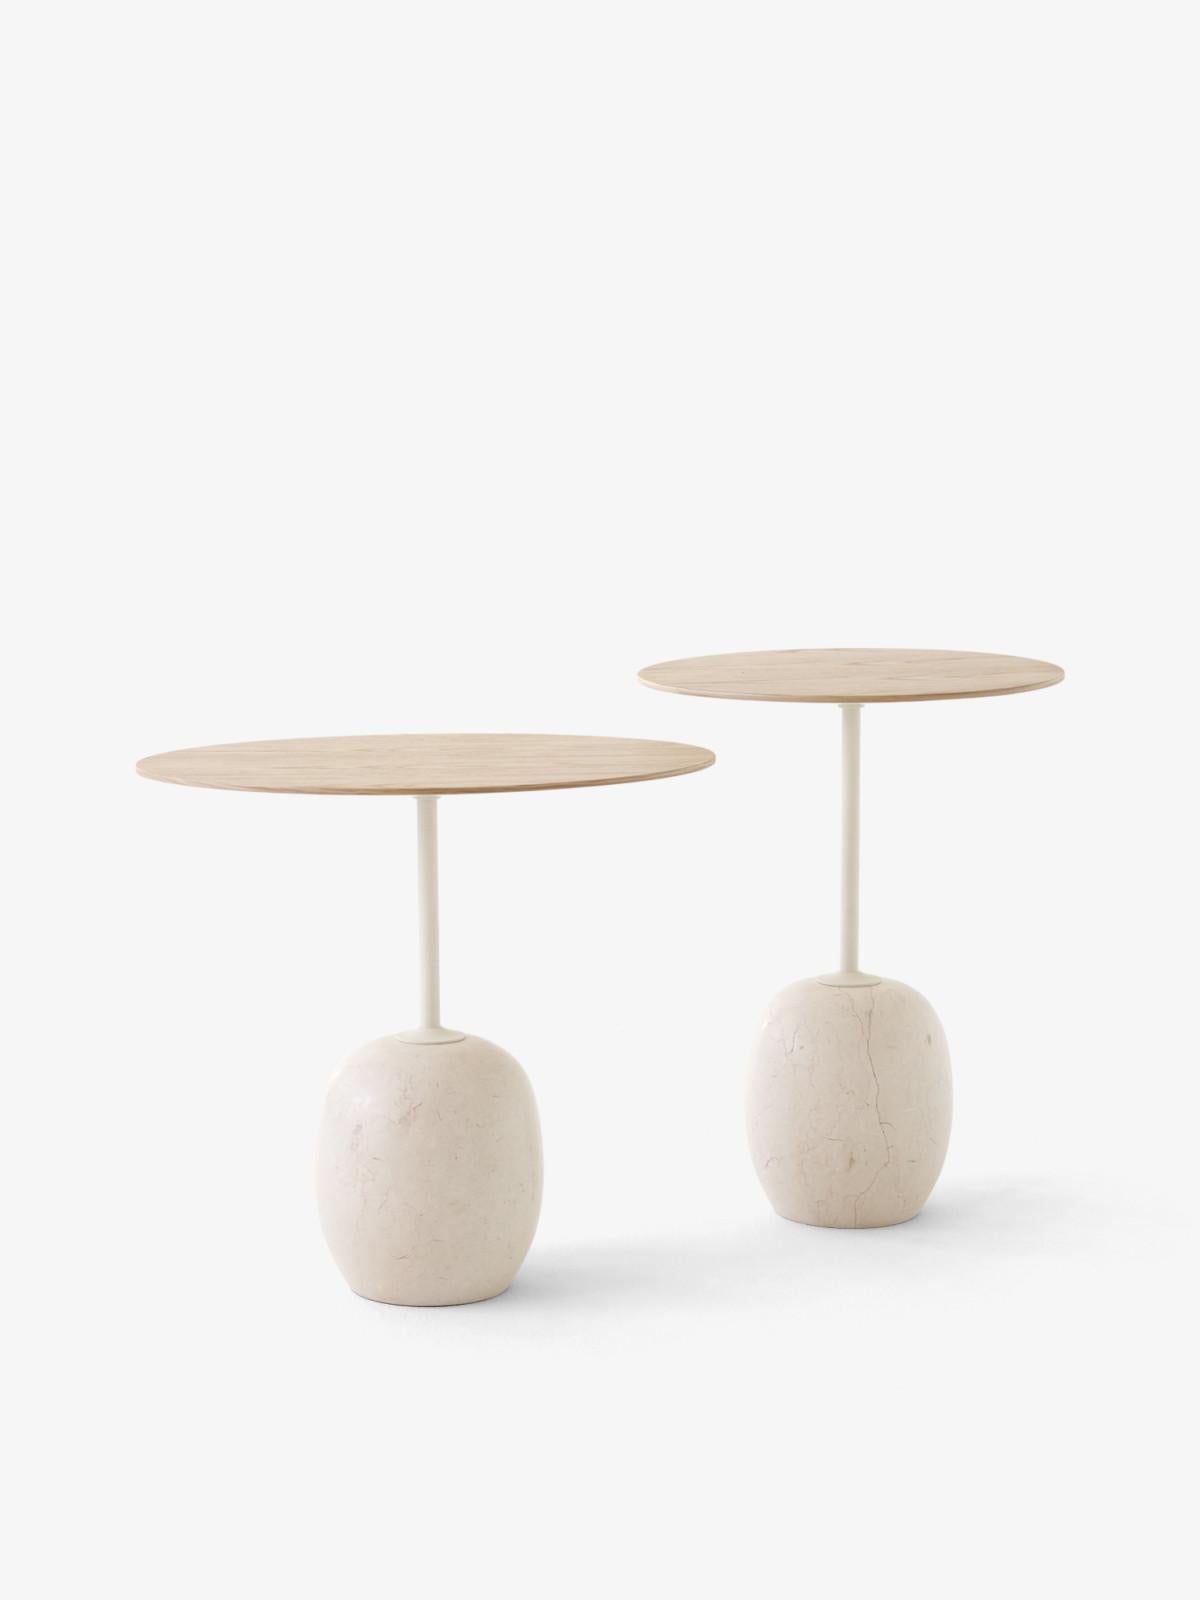 At first glance, Lato resembles a sculpture, with its slim, oval table top balanced by an oval-shaped base. 
The marble is turned into shape on a lathe and then honed to a semi Matt finish. 
Striking, graphic and poetic, its purity of form is